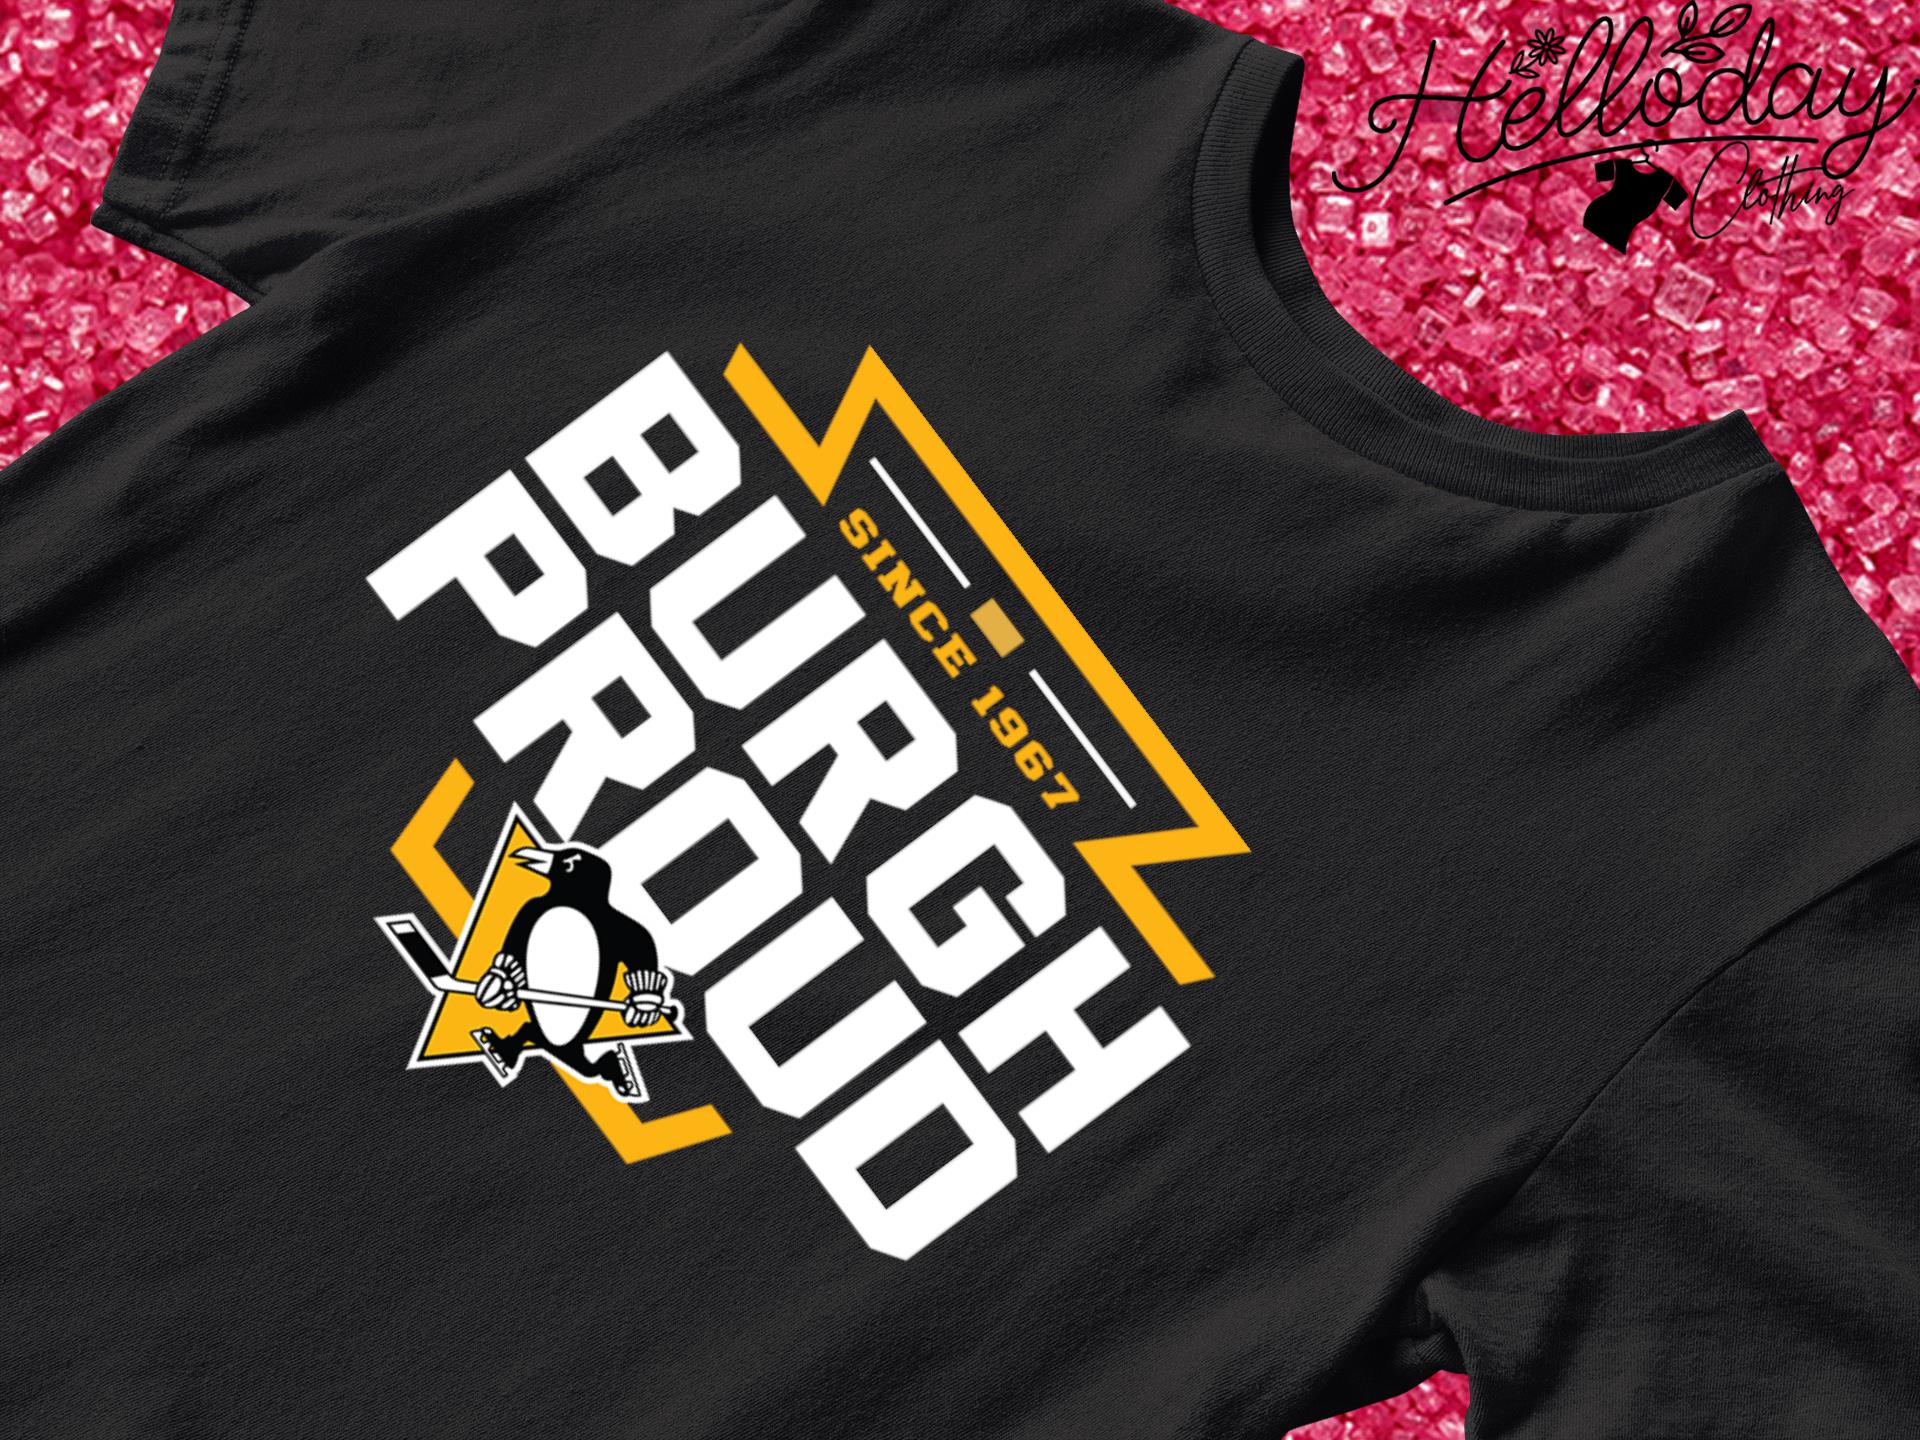 Pittsburgh Penguins Burgh Proud since 1967 shirt, hoodie, sweater, long  sleeve and tank top